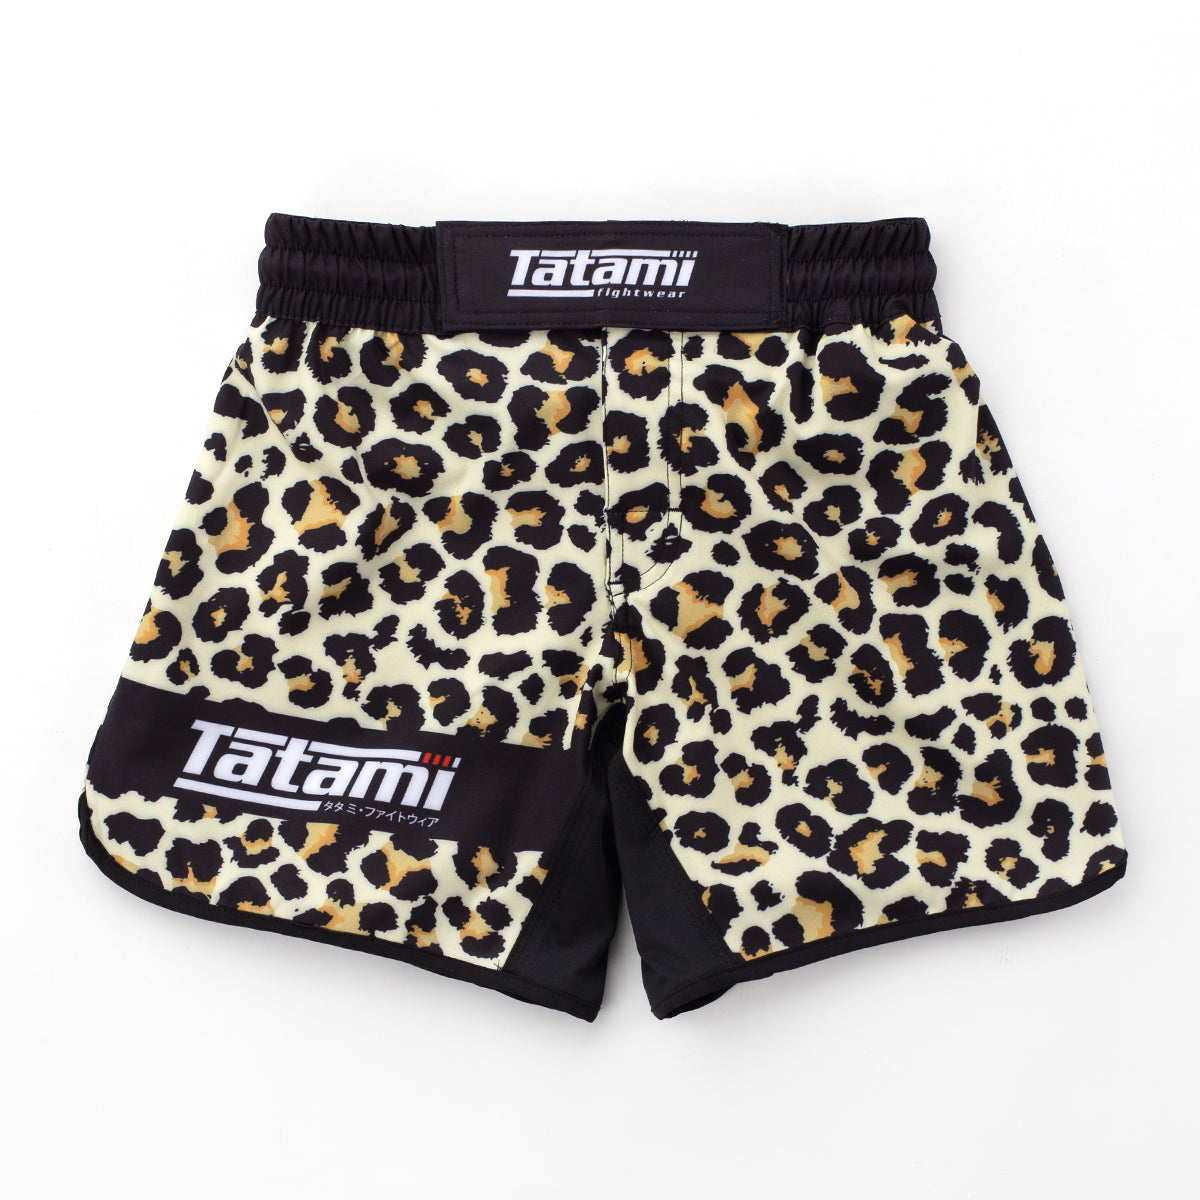 Tatami "Recharge" Fight Shorts - Leopard